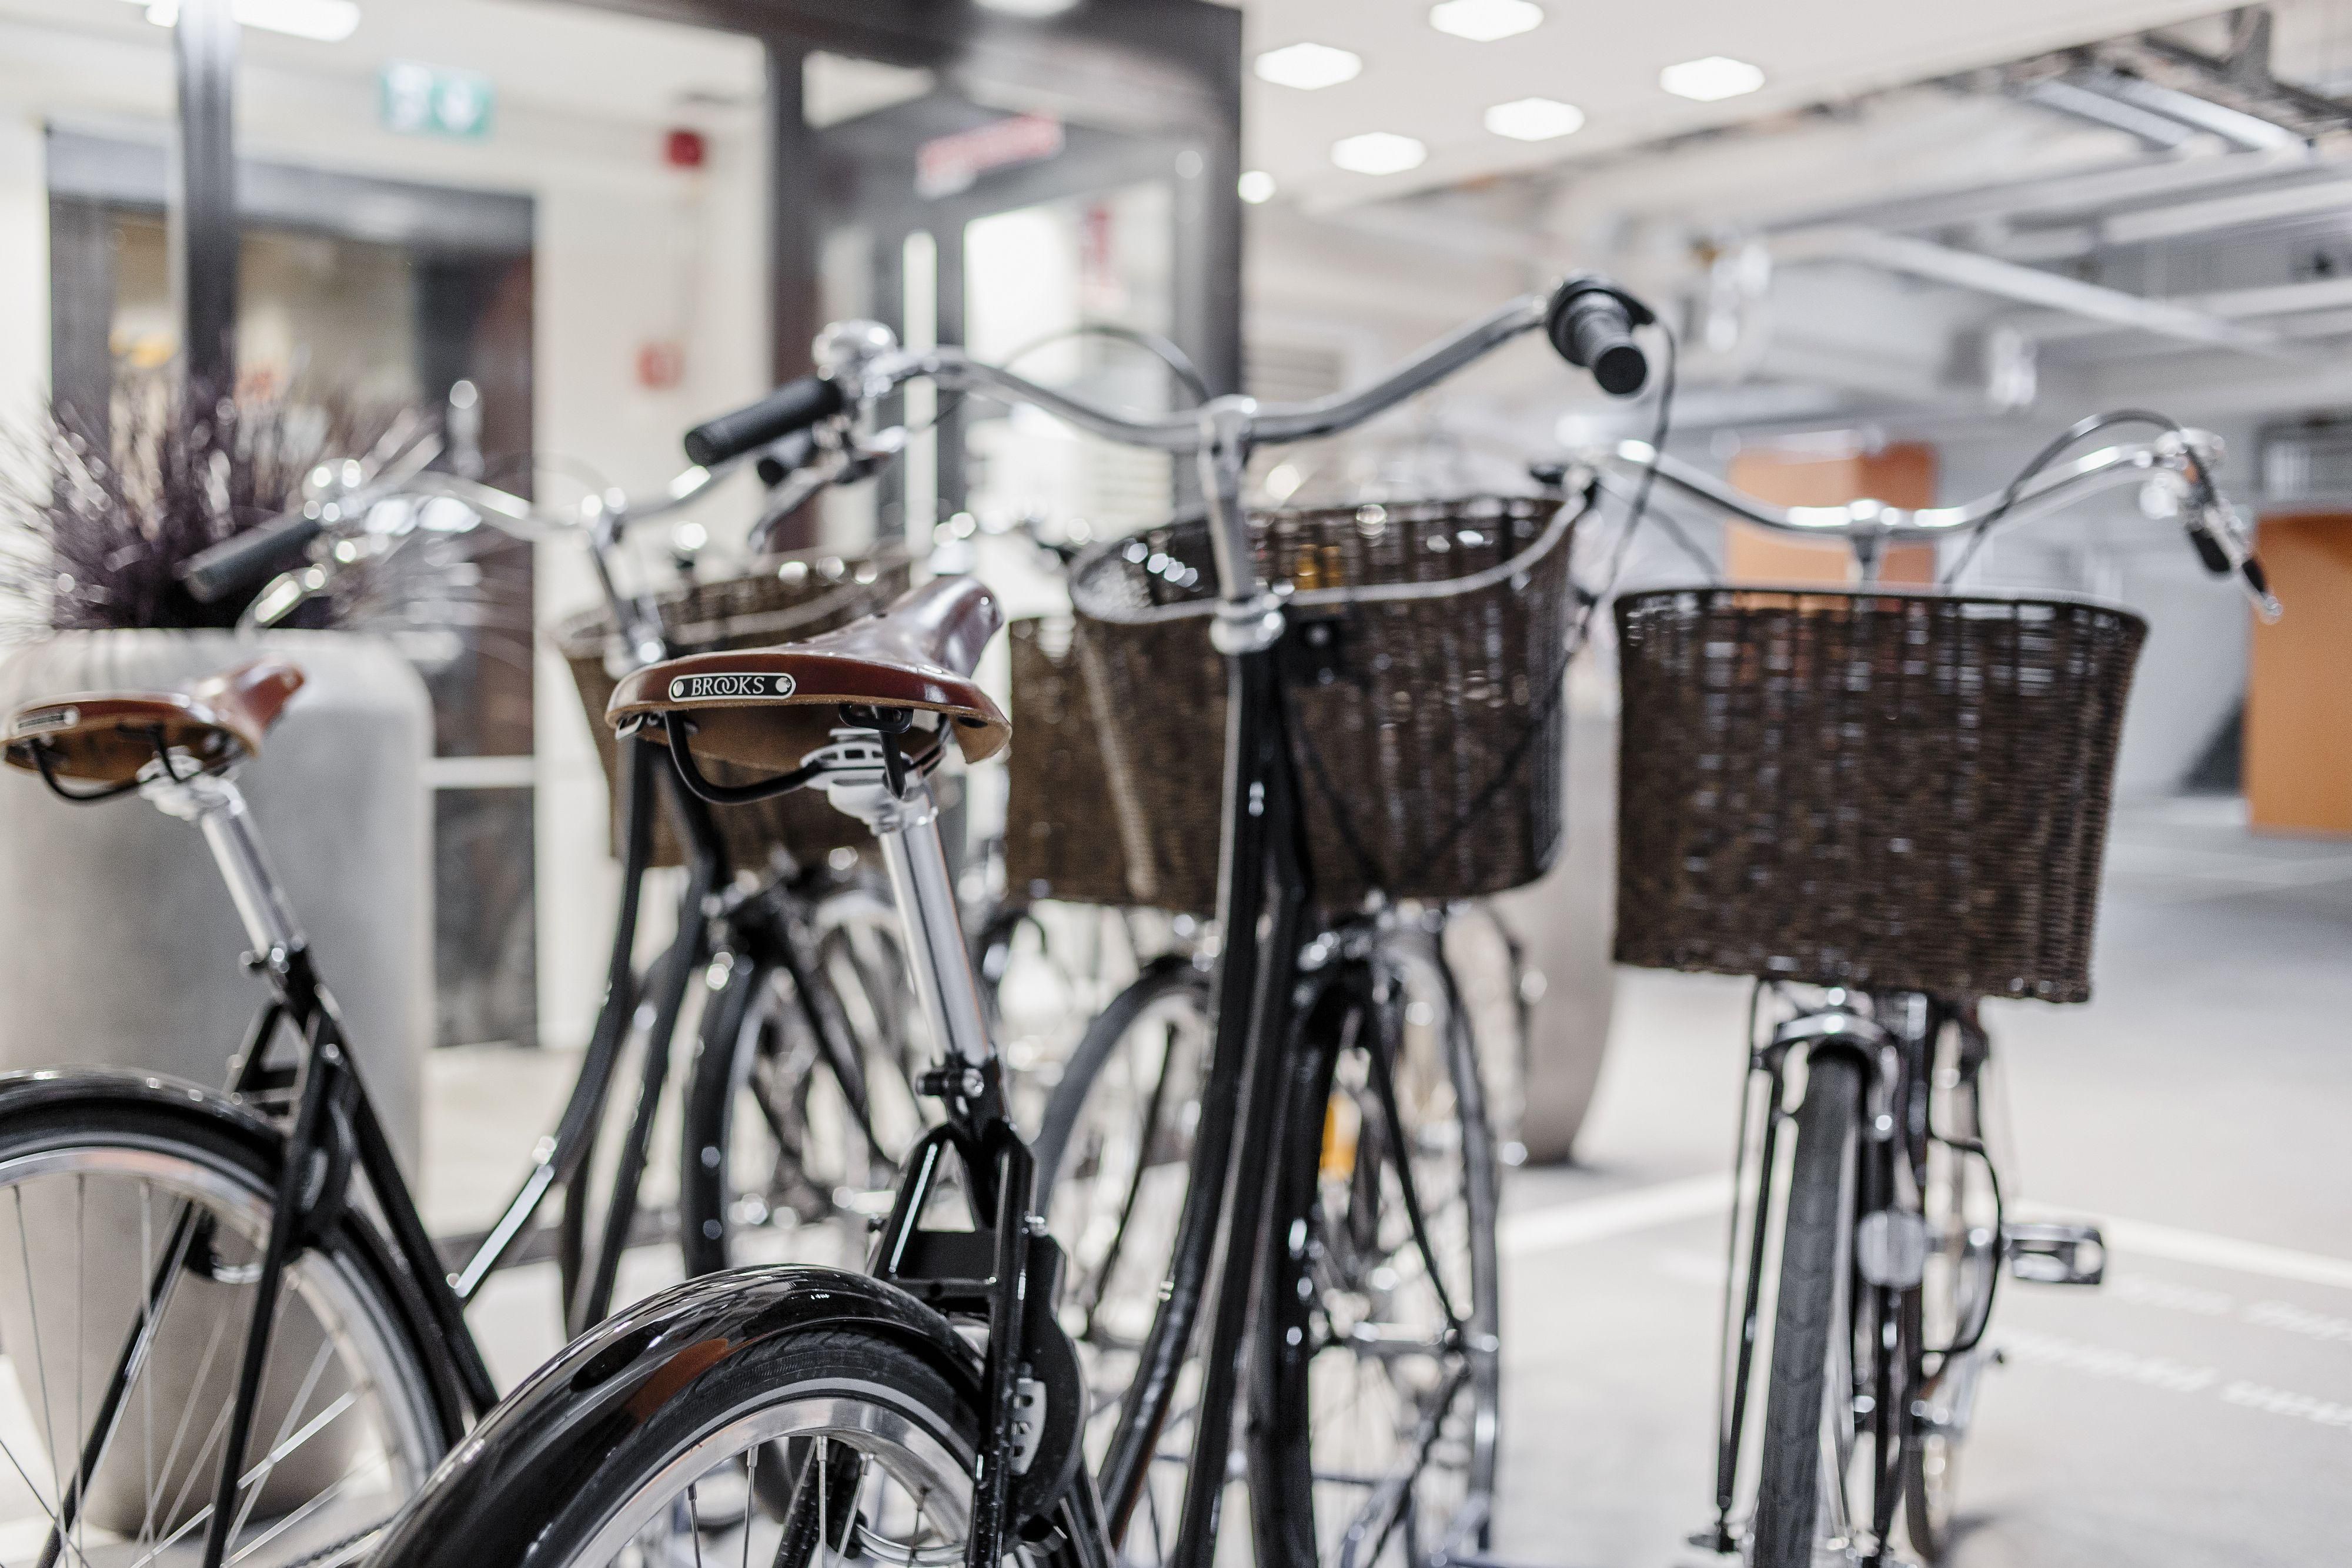 With our Pelago bikes it is easy and convenient to go around and see the best sights of Helsinki. Click the link below and select our Neigbourhood to check out what places we recommend you to visit.